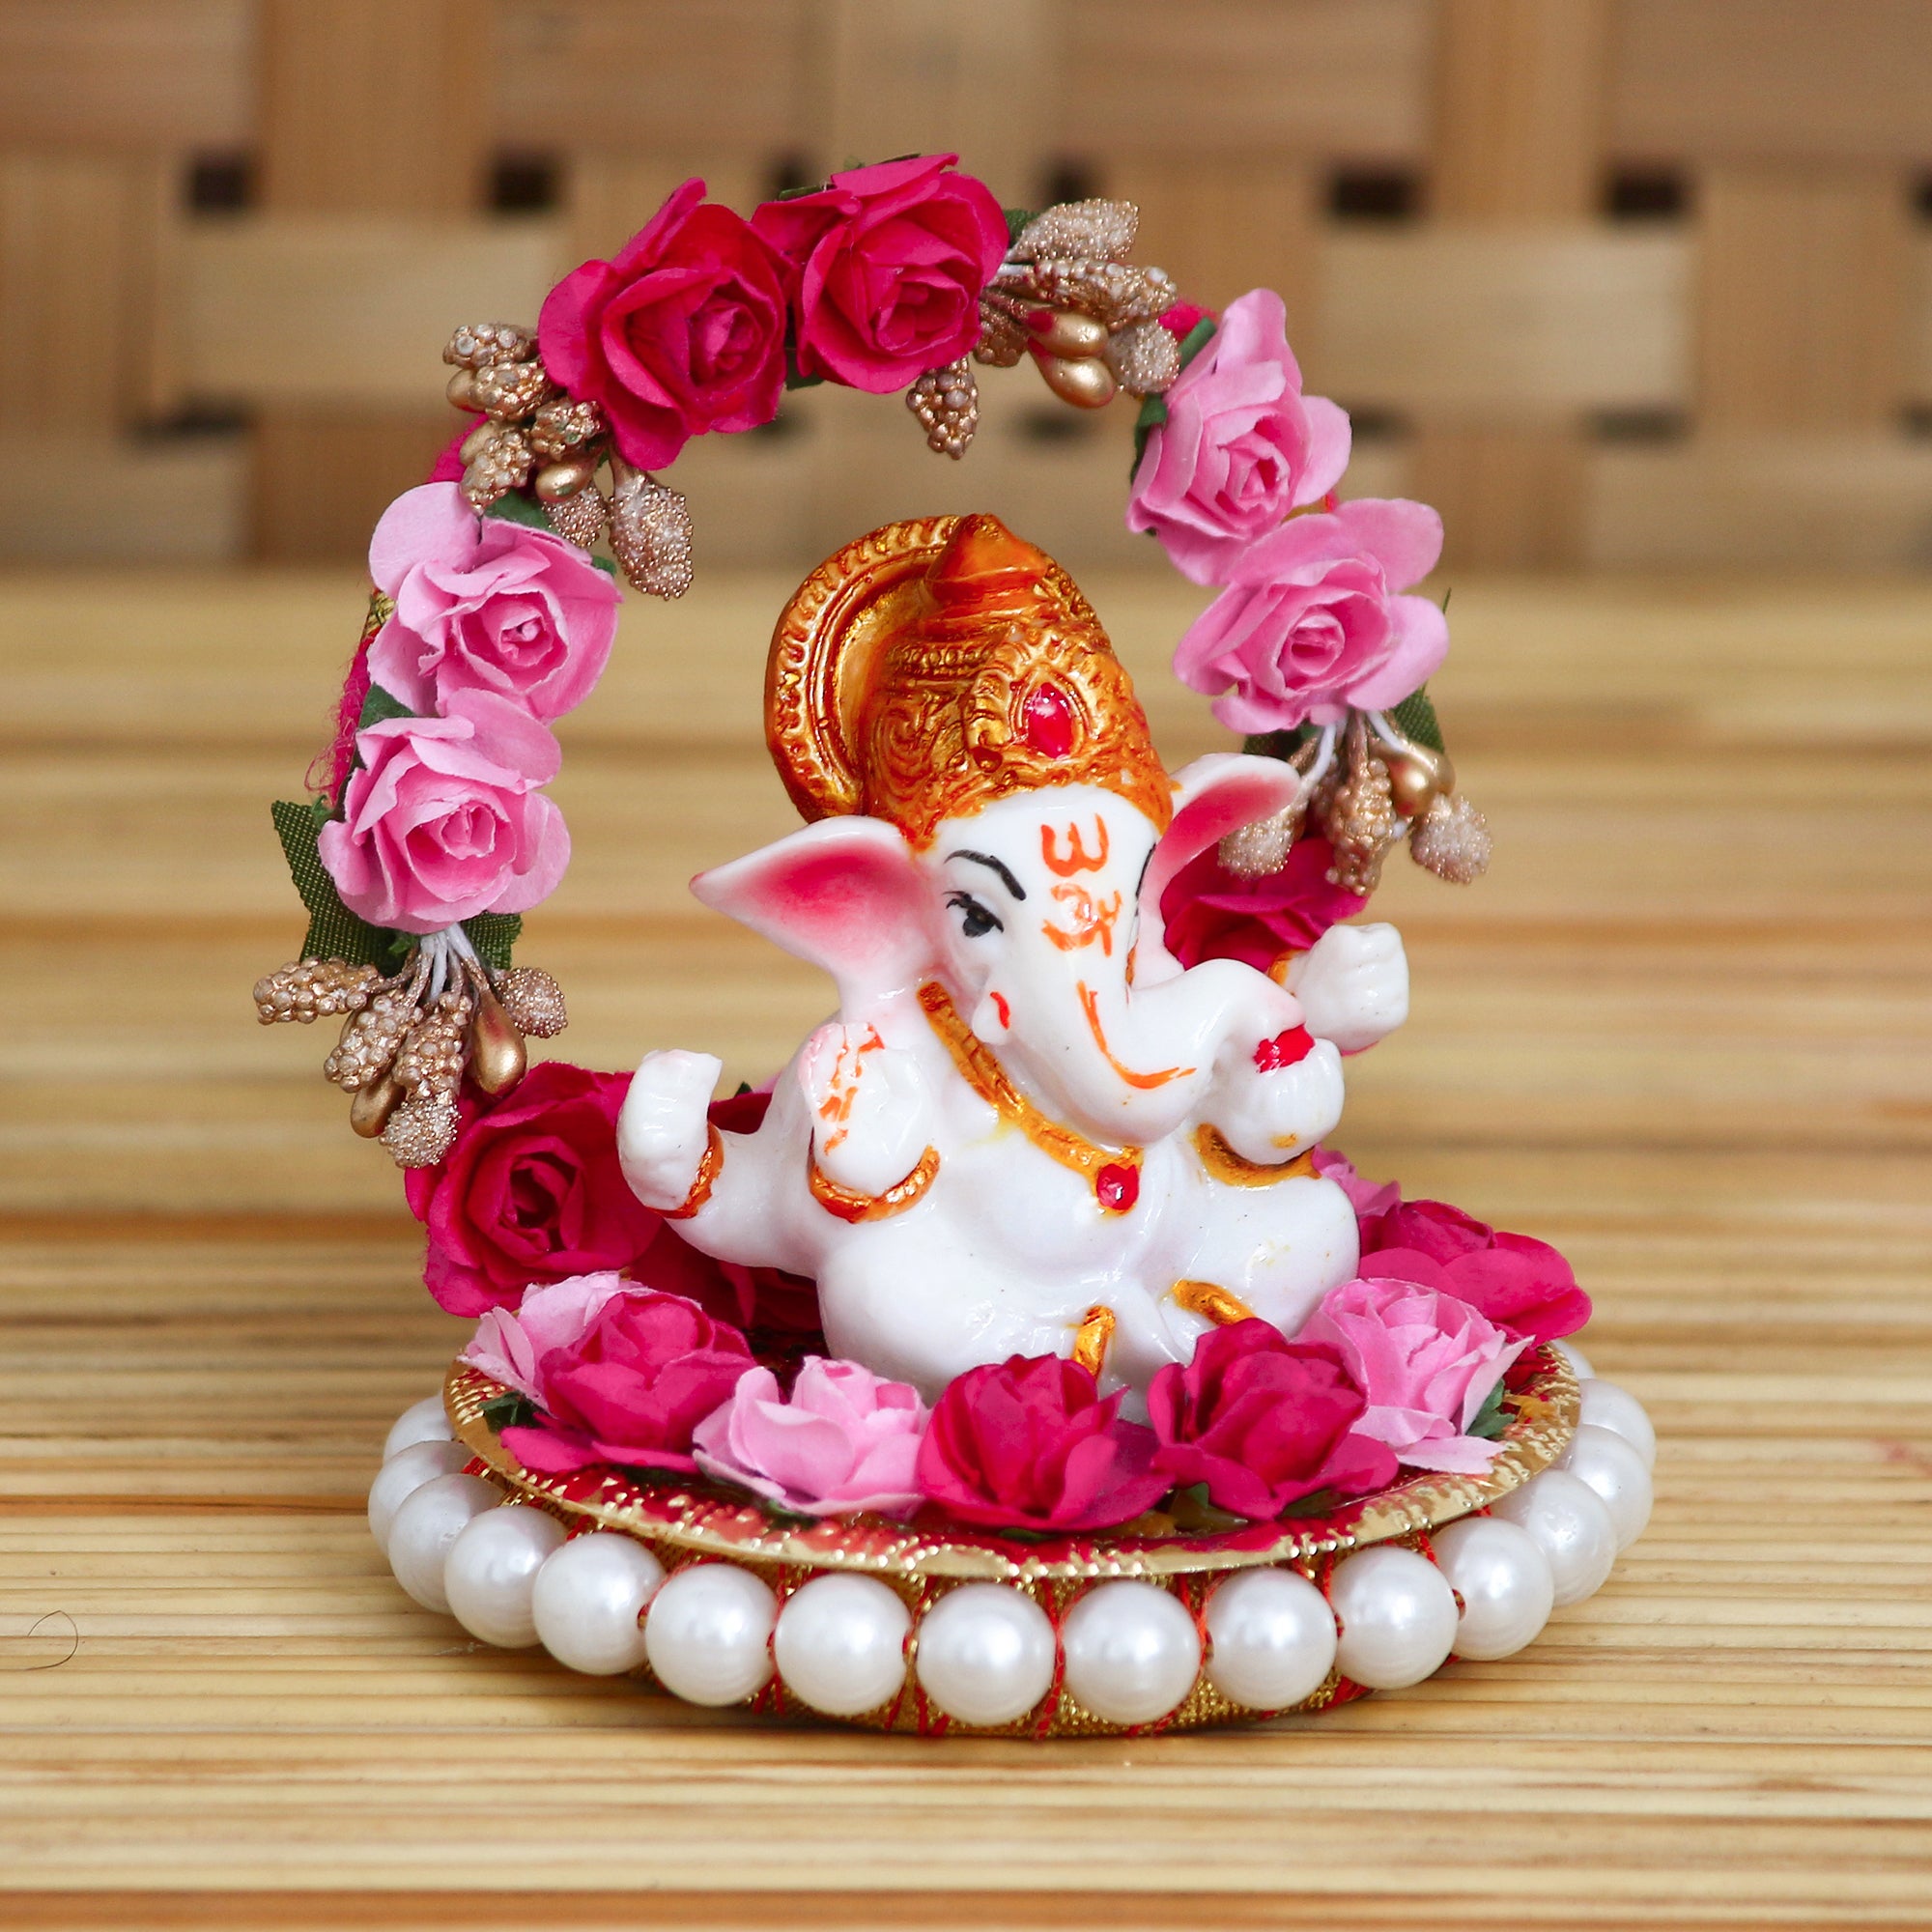 Polyresin Lord Ganesha Idol on Decorative Handcrafted Plate with Throne of Pink and Red Flowers 1